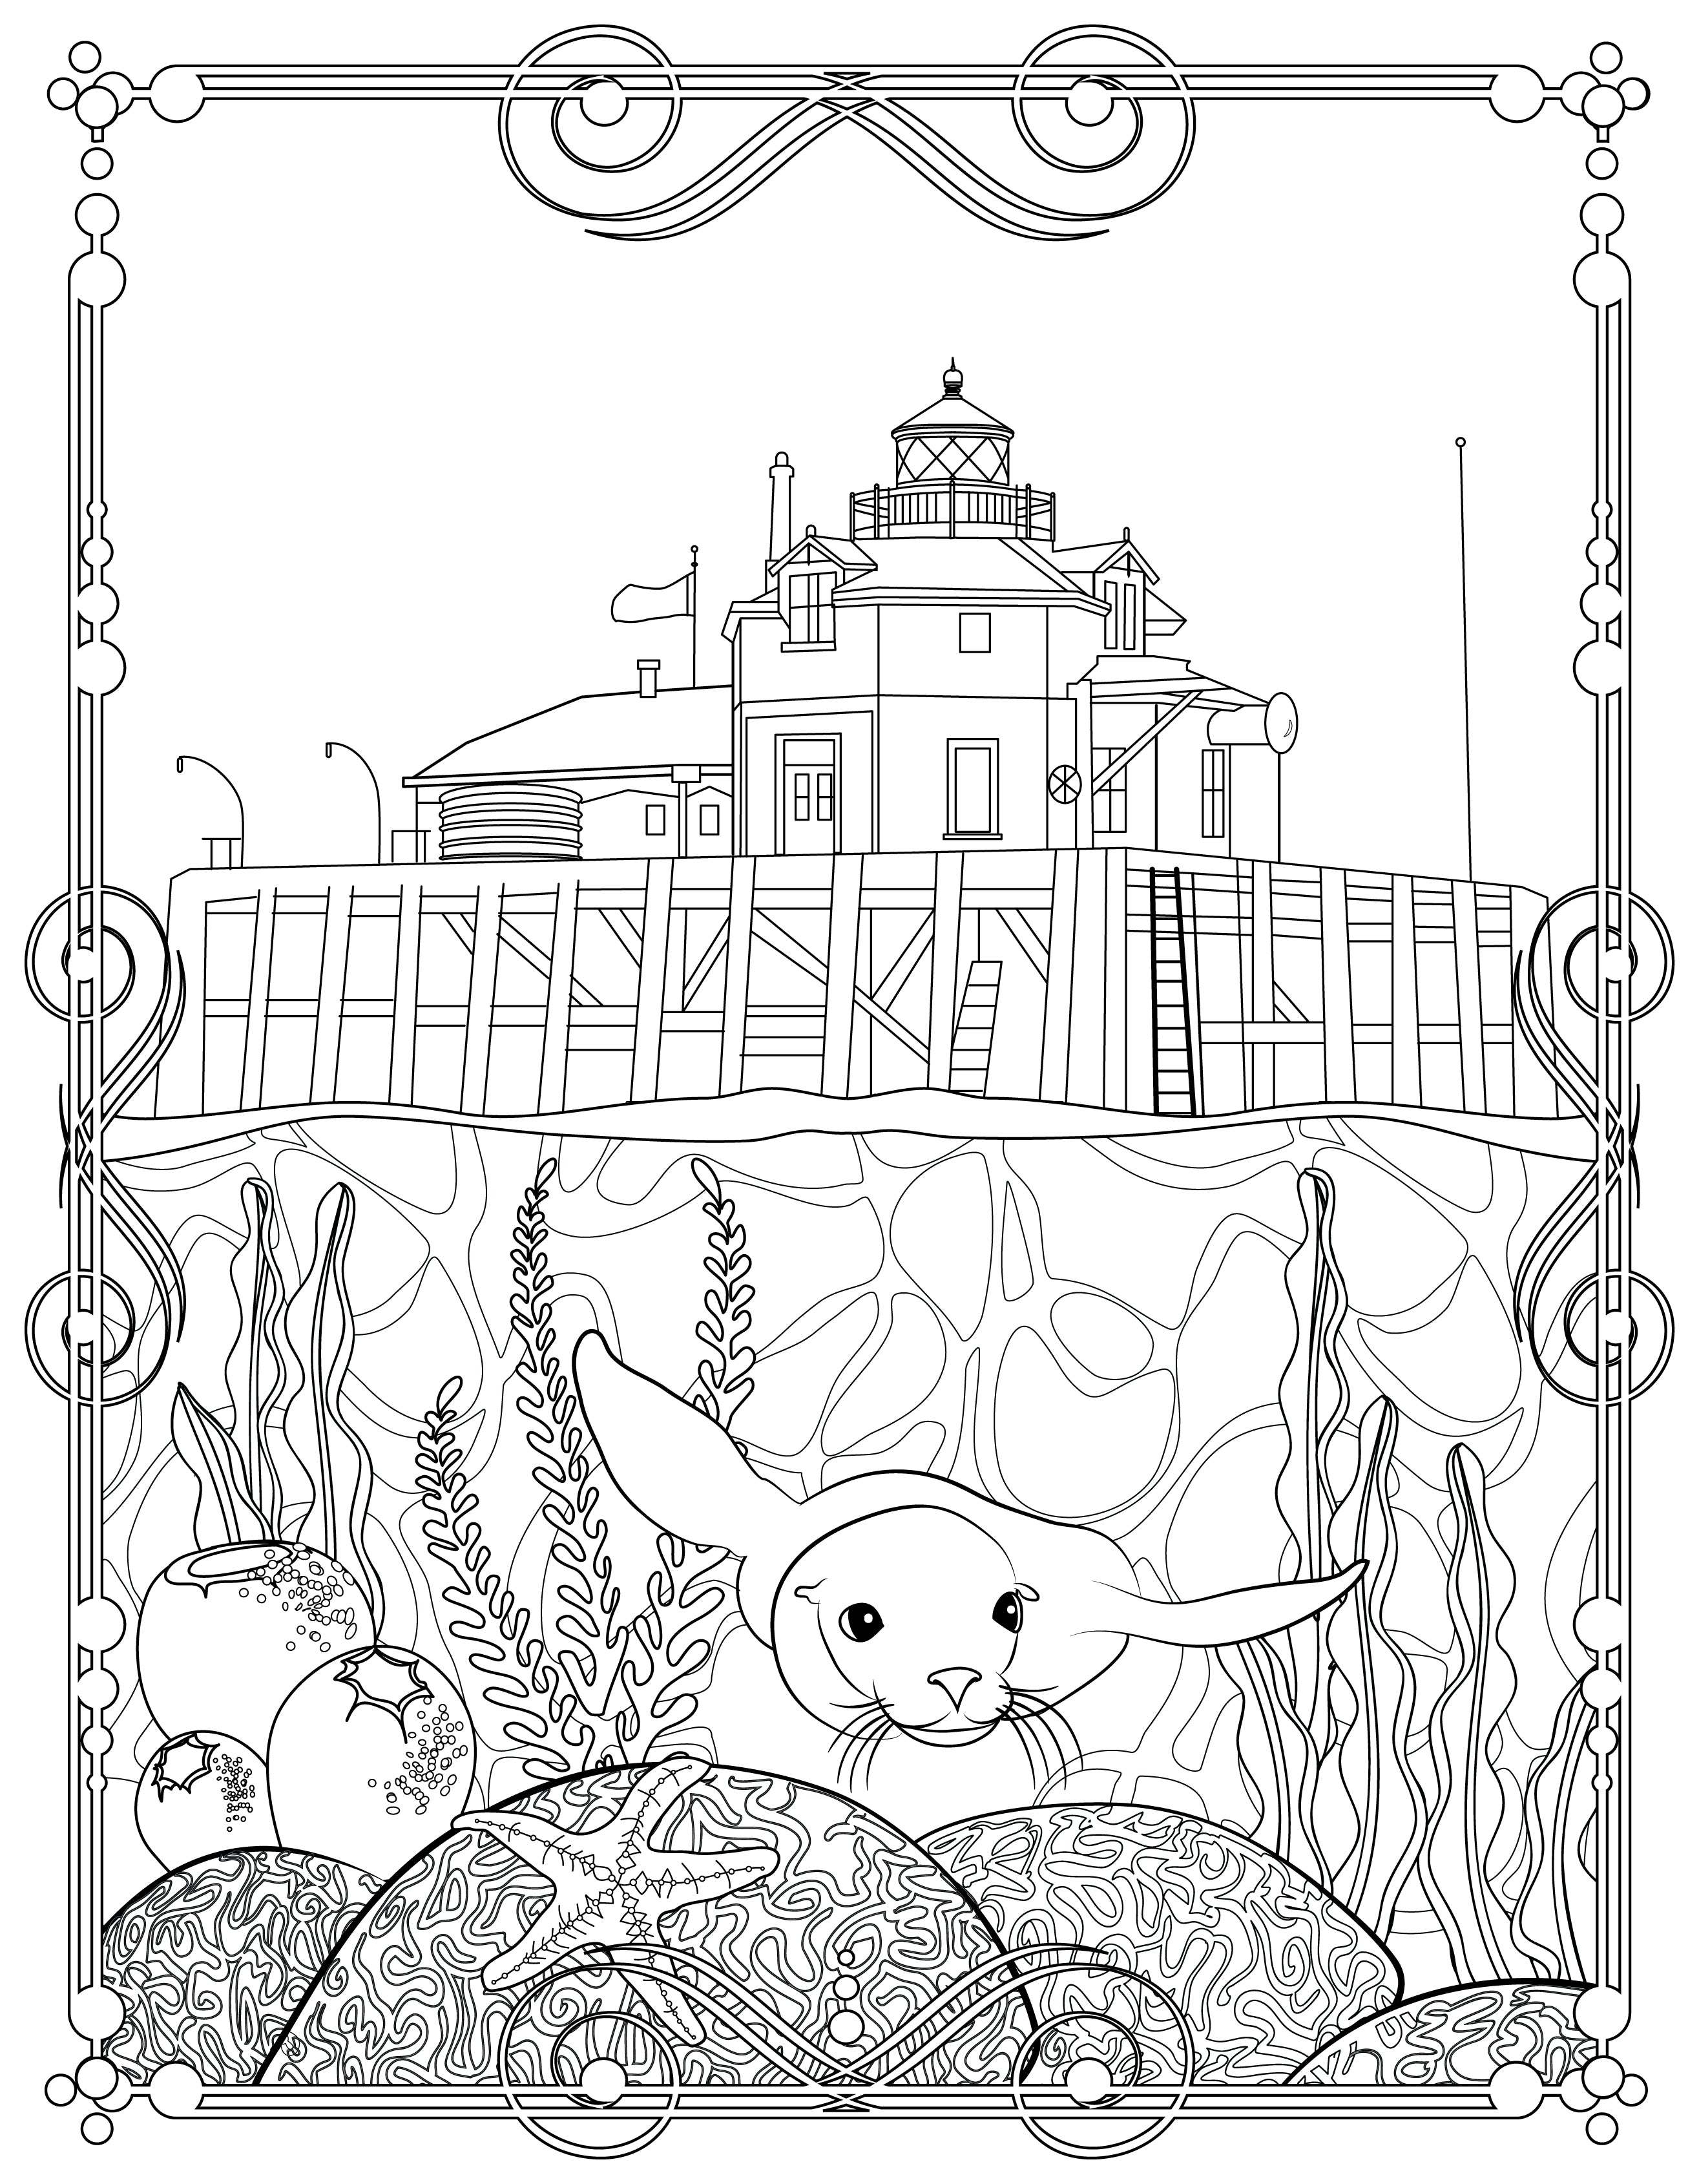 Single Coloring Book Page - Desdemona Sands Lighthouse, Oregon - Digital Print-from-Home